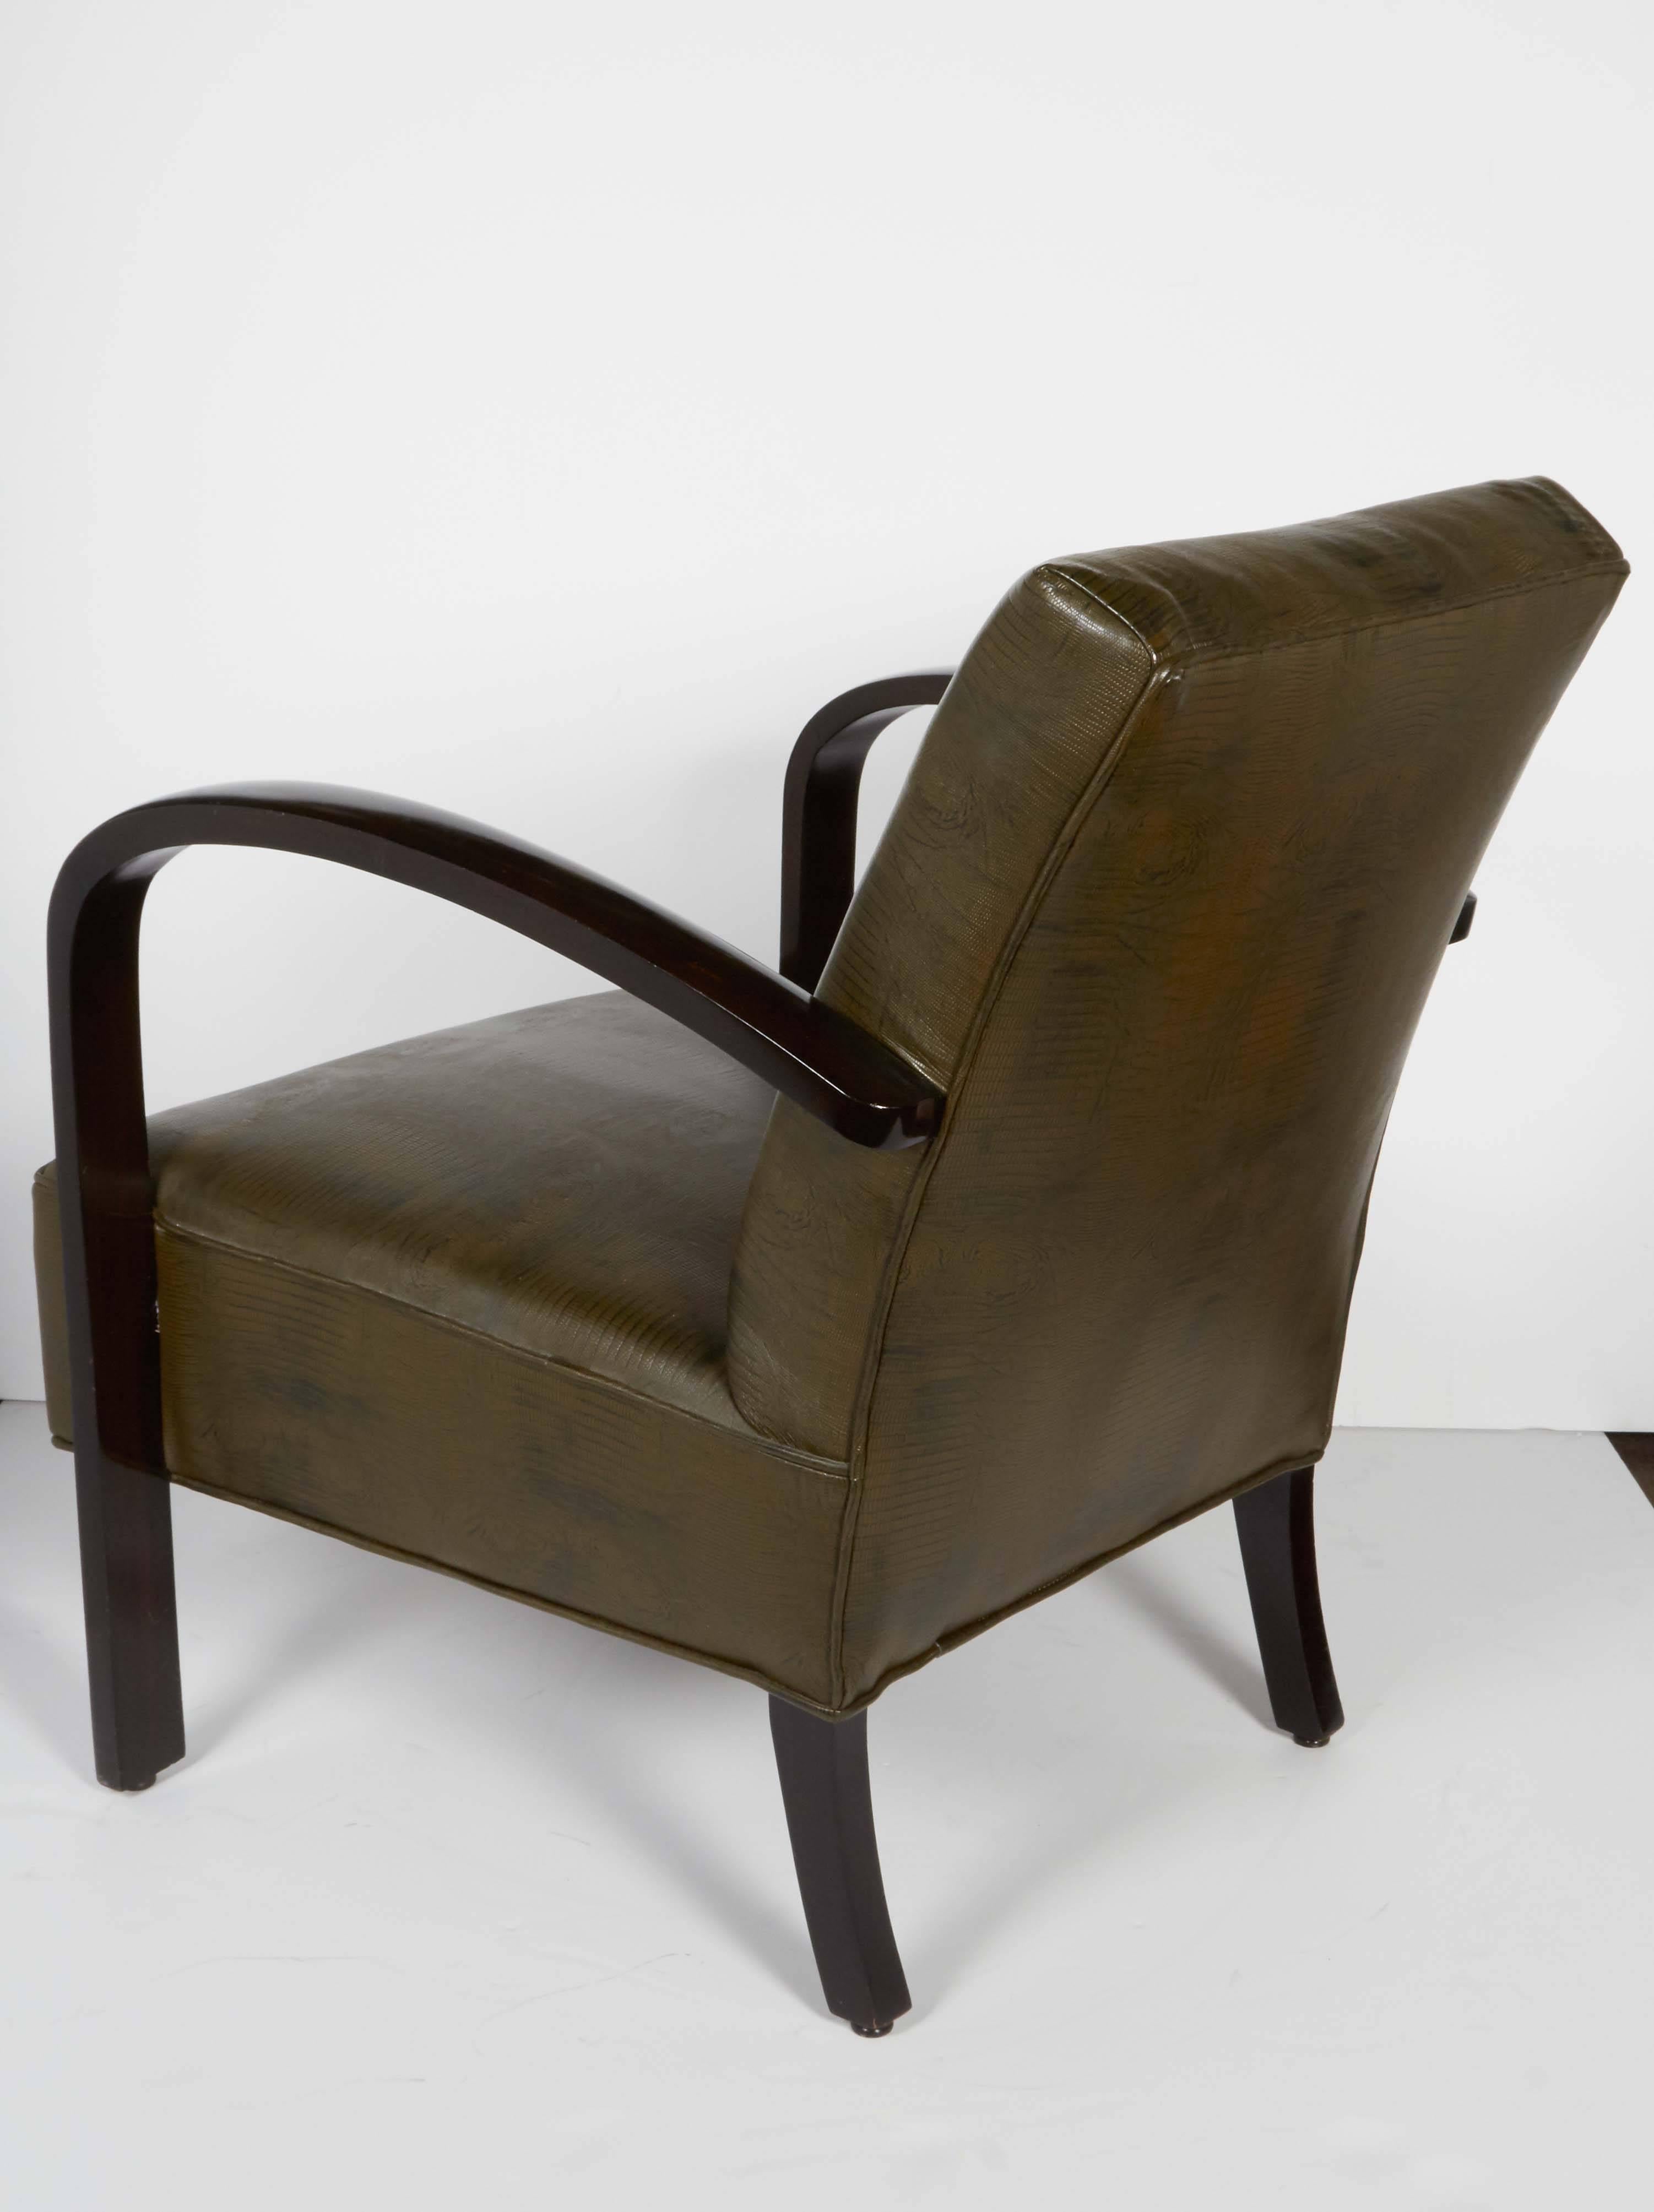 20th Century Pair of French Art Deco Lounge Chairs